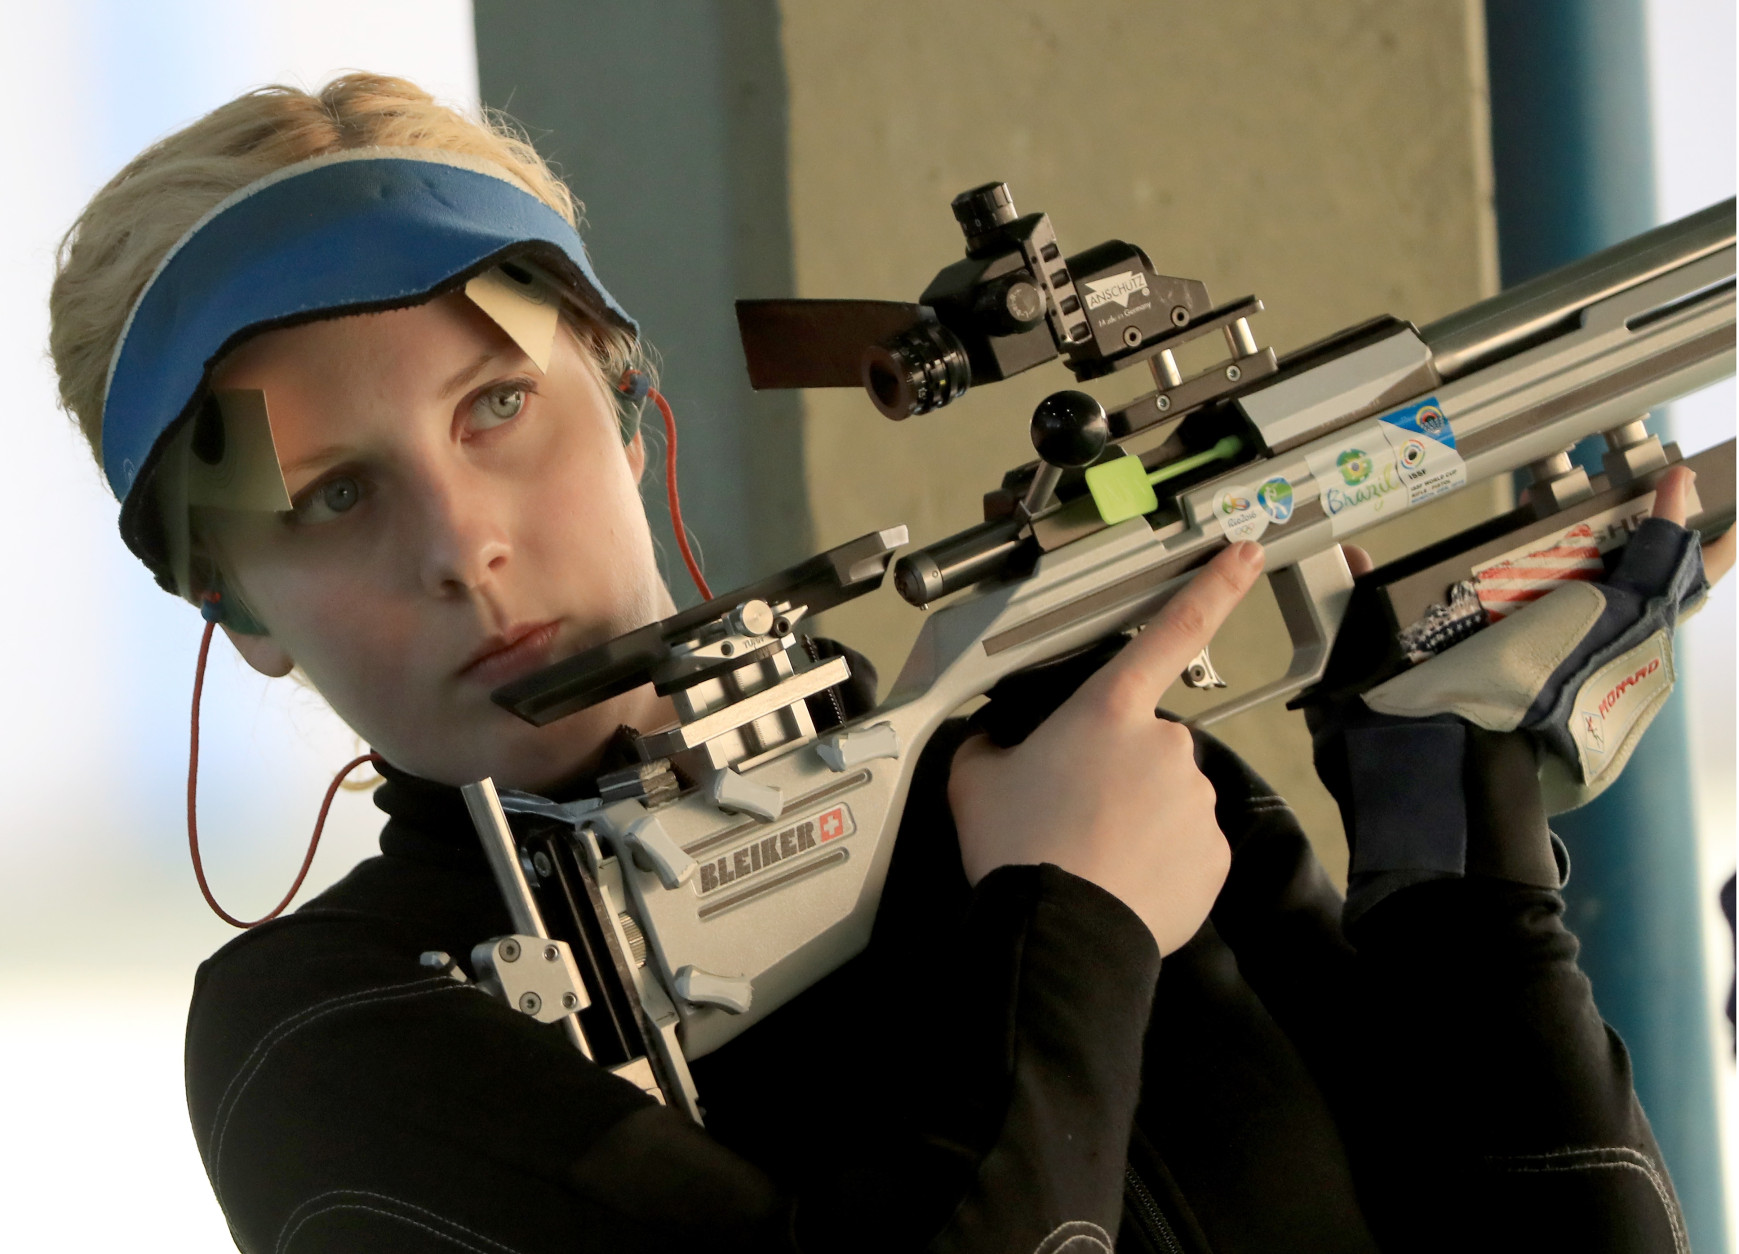 RIO DE JANEIRO, BRAZIL - AUGUST 11:  Virginia Thrasher of the United States competes in the 50m 3 Position Rifle qualifying match on Day 6 of the Rio 2016 Olympics at the Olympic Shooting Centre on August 11, 2016 in Rio de Janeiro, Brazil.  (Photo by Samoa Greenwood/Getty Images)